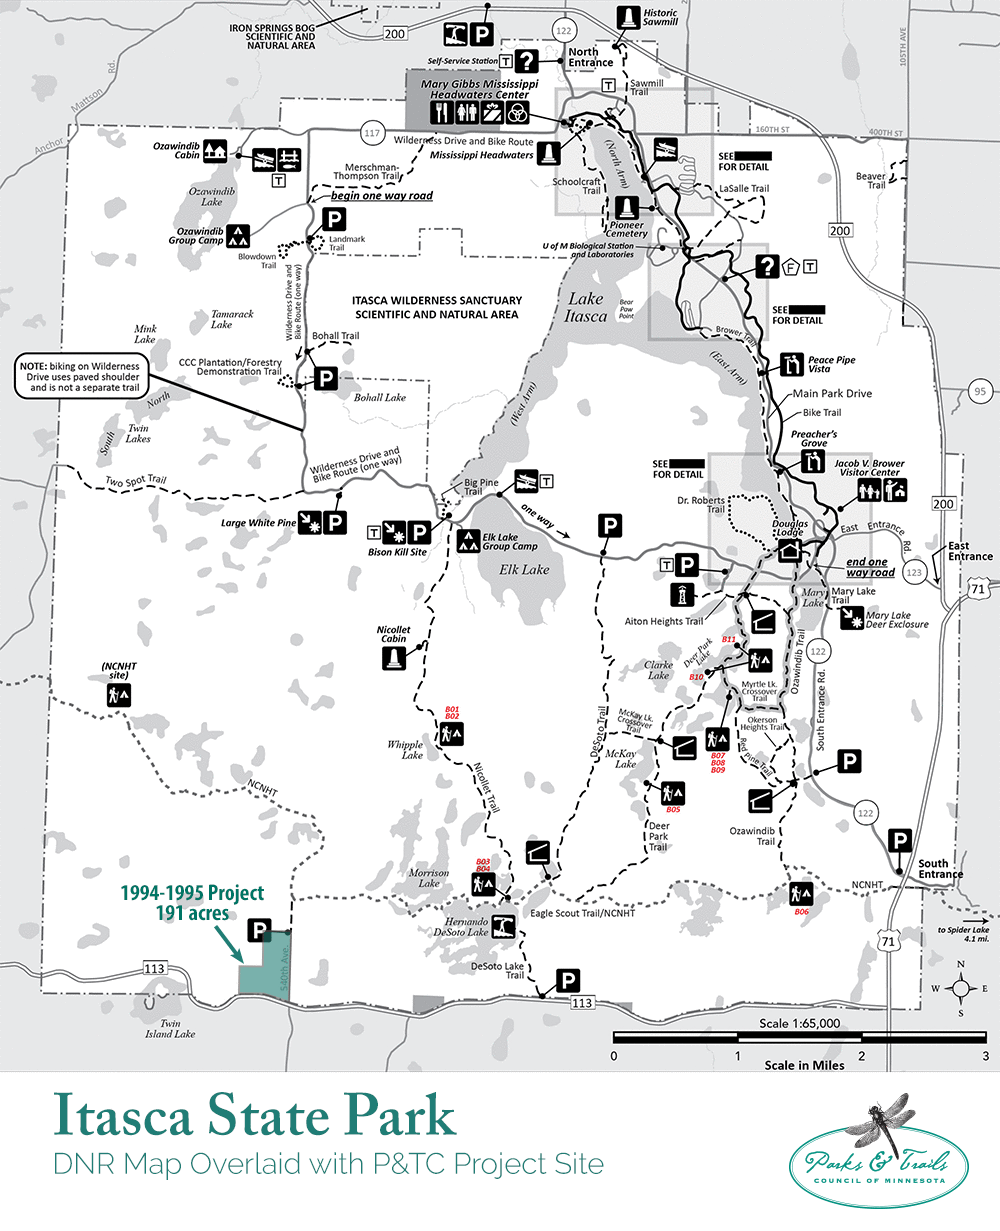 Map of Itasca showing land projects